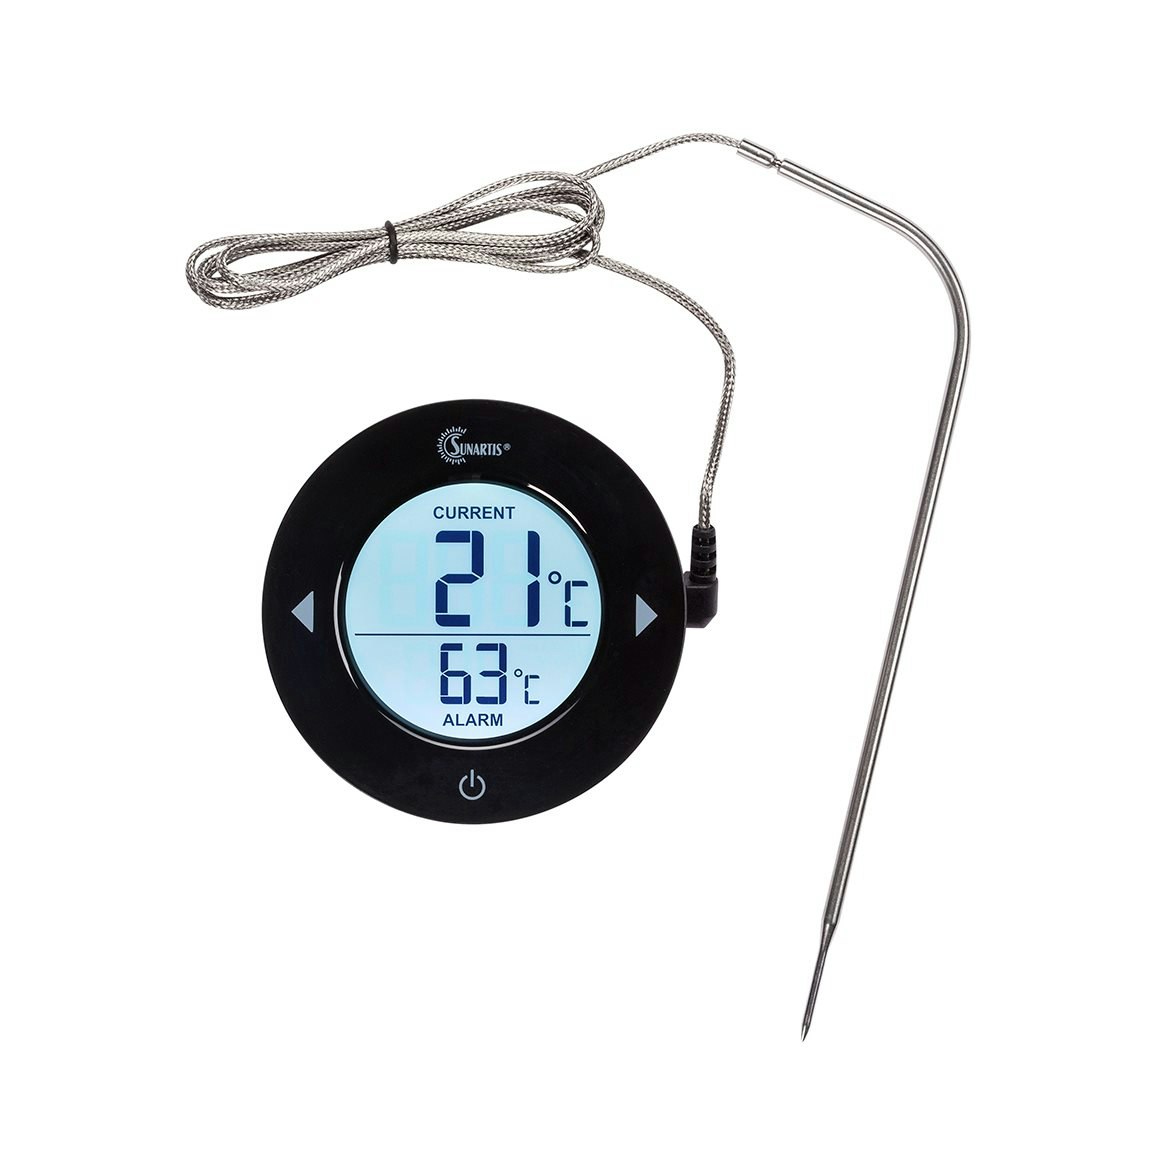 Take 22% Off This Wireless Meat Thermometer